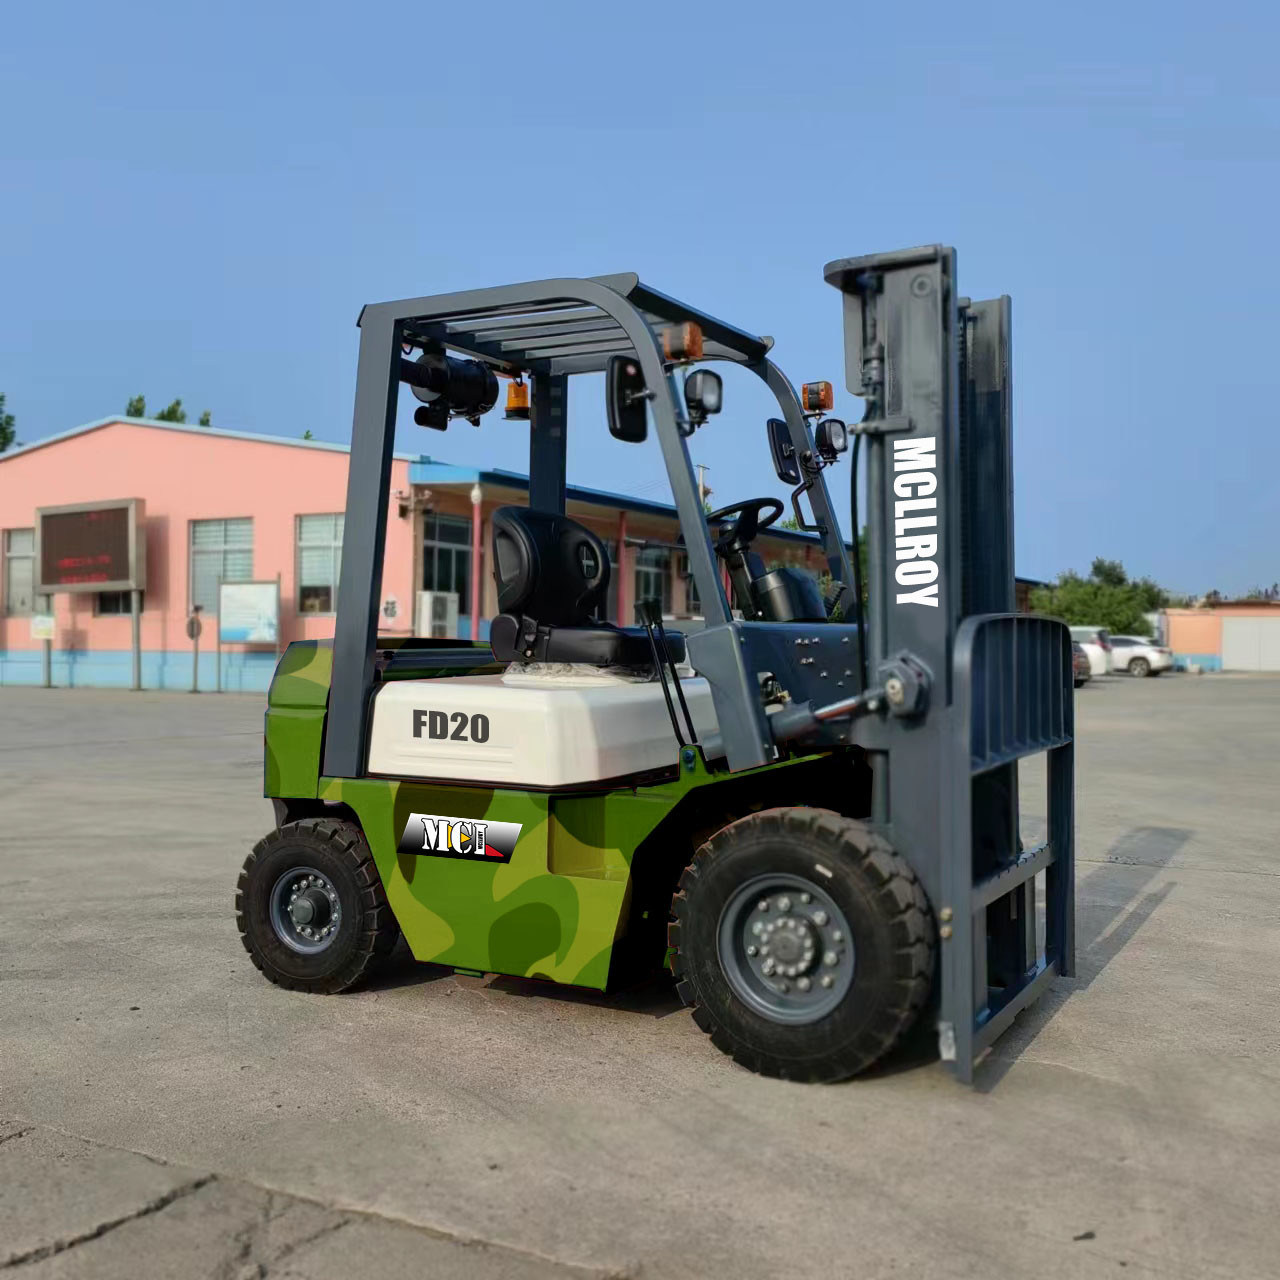 Reduced Operator Fatigue Interal Combustion Forklift Truck Working Pressure 18.5 Mpa